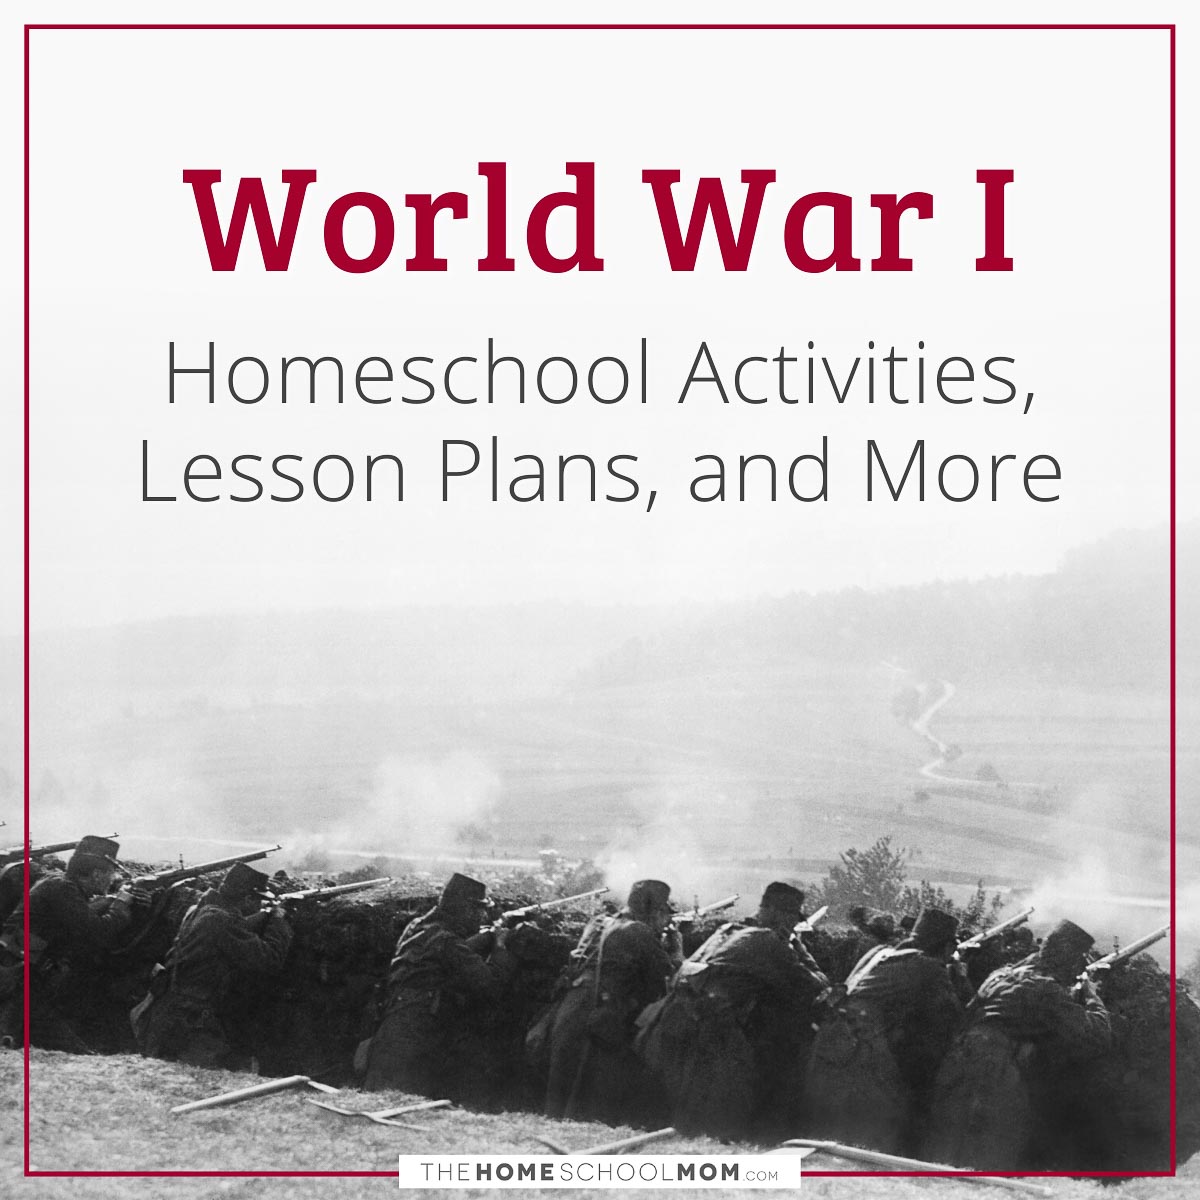 World War I Homeschool Activities, Lesson Plans, and More.